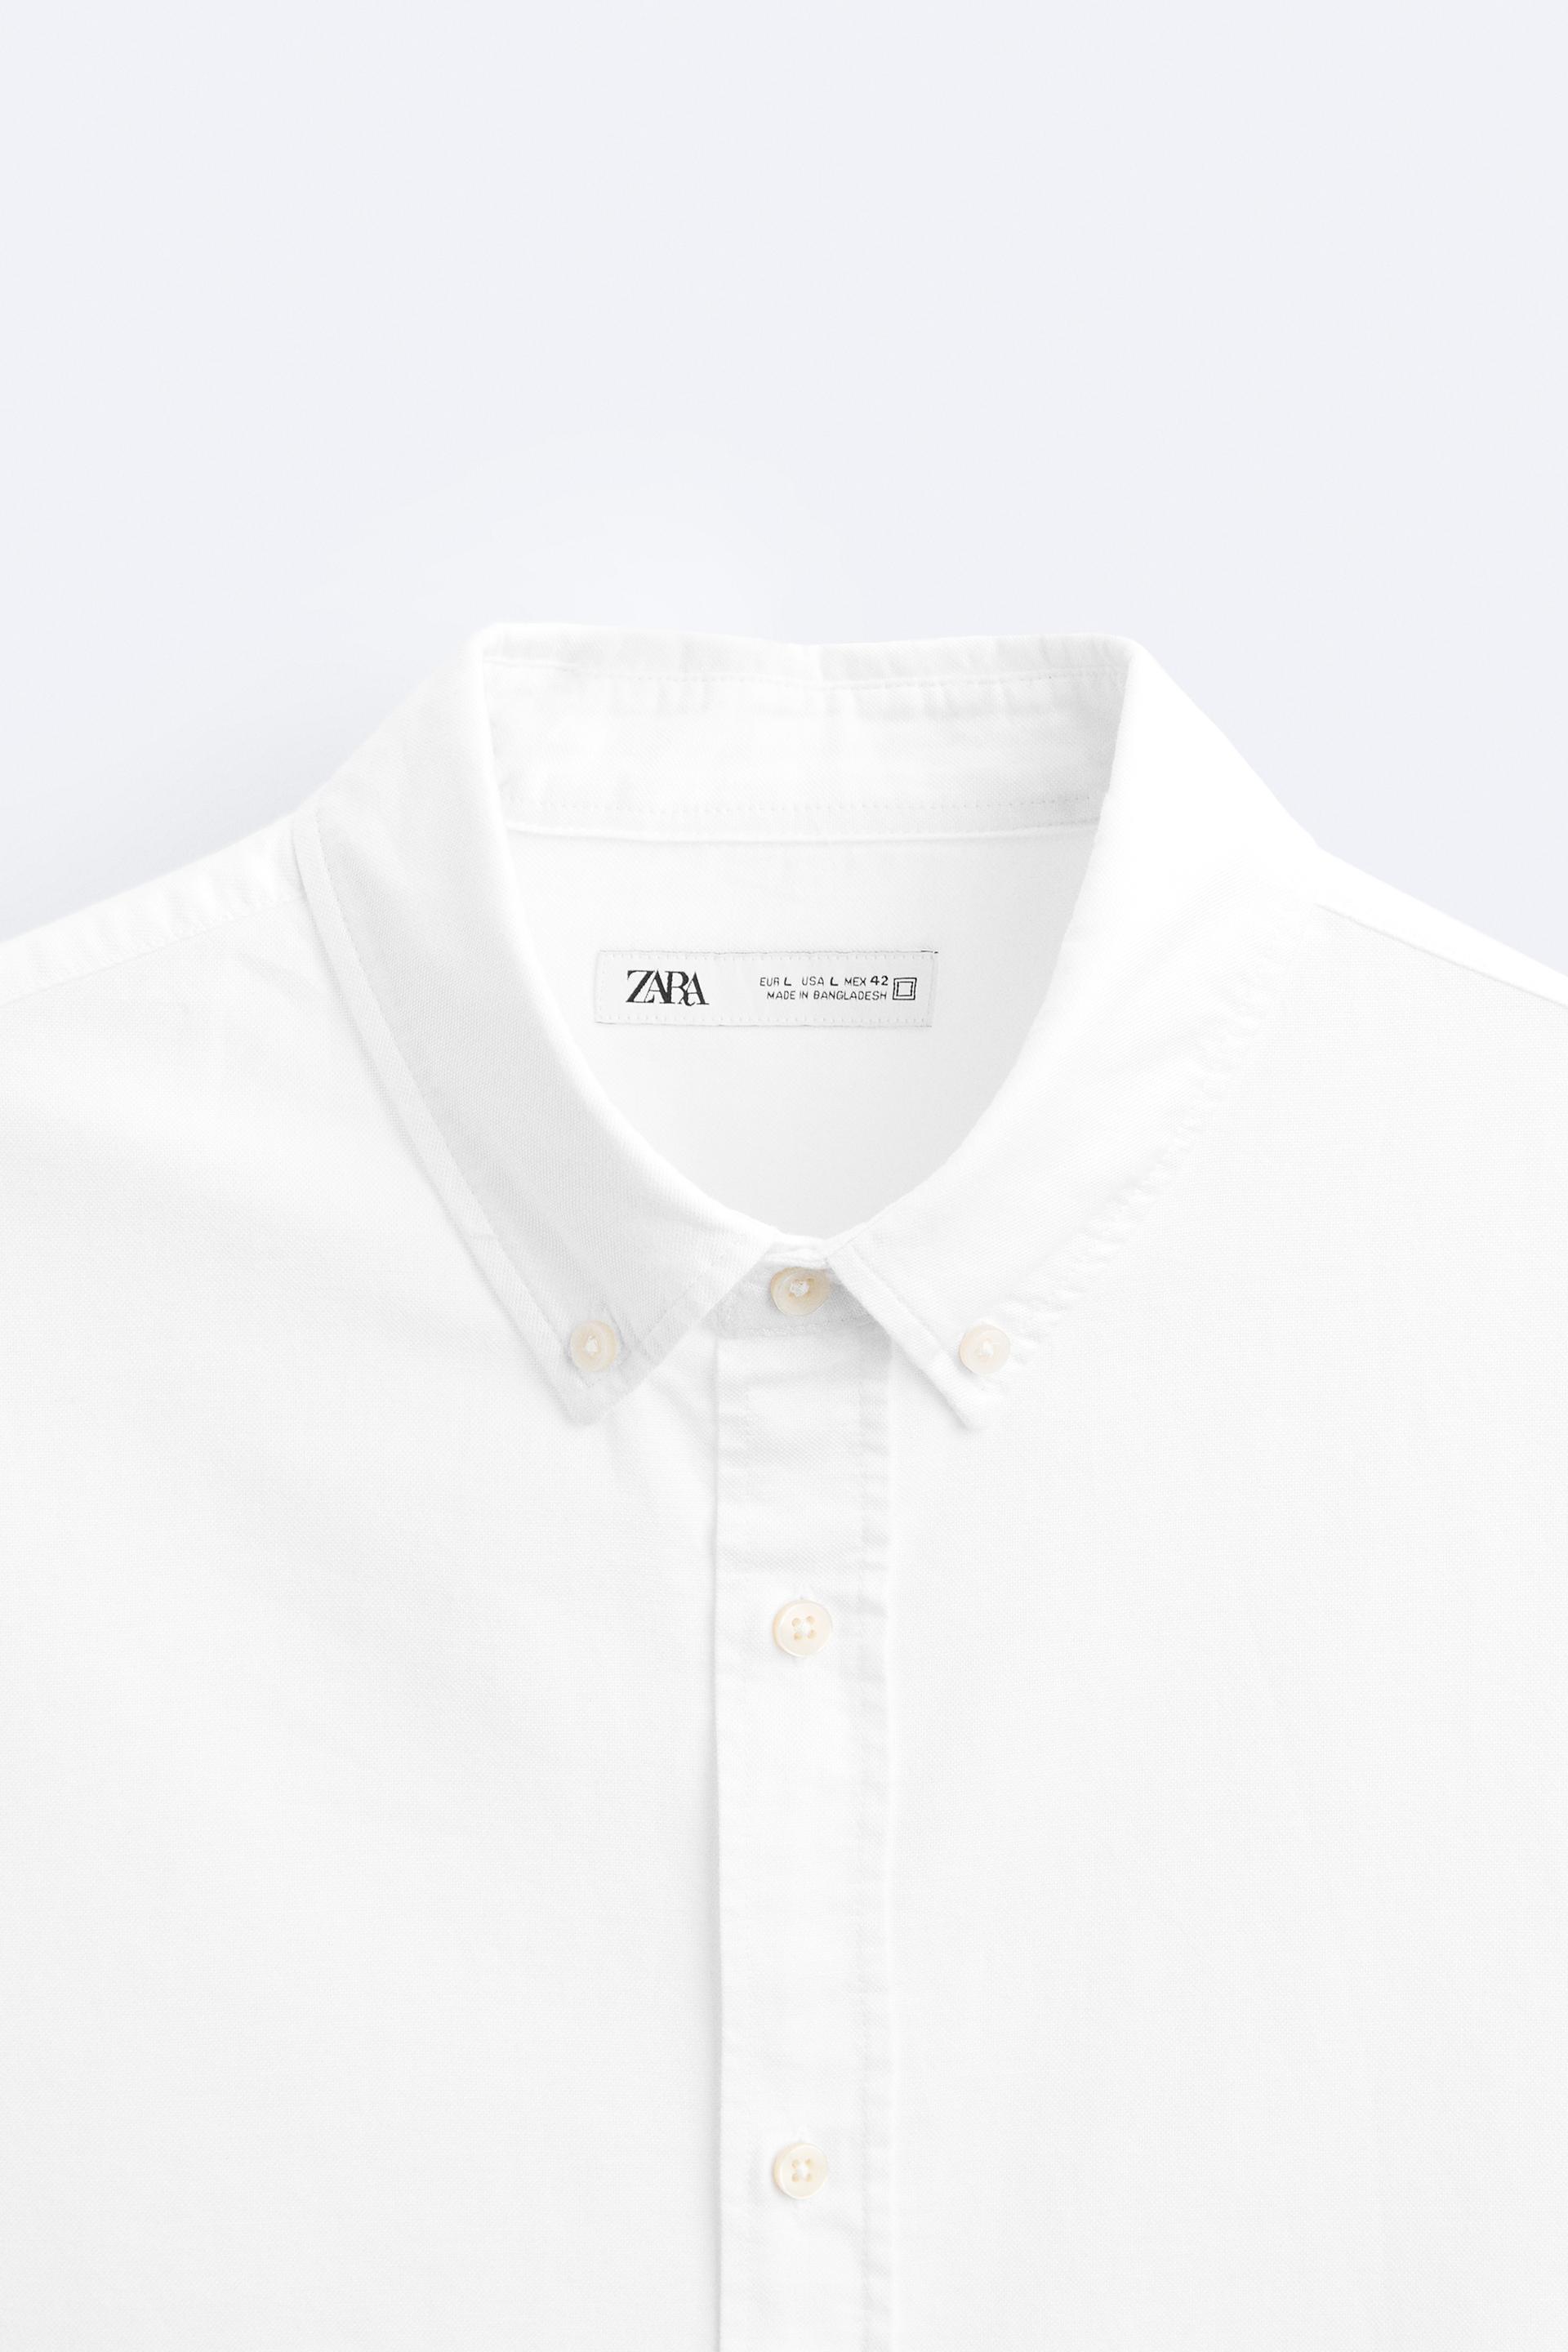 Zara L Men's Shirts Price Starting From Rs 2,512. Find Verified